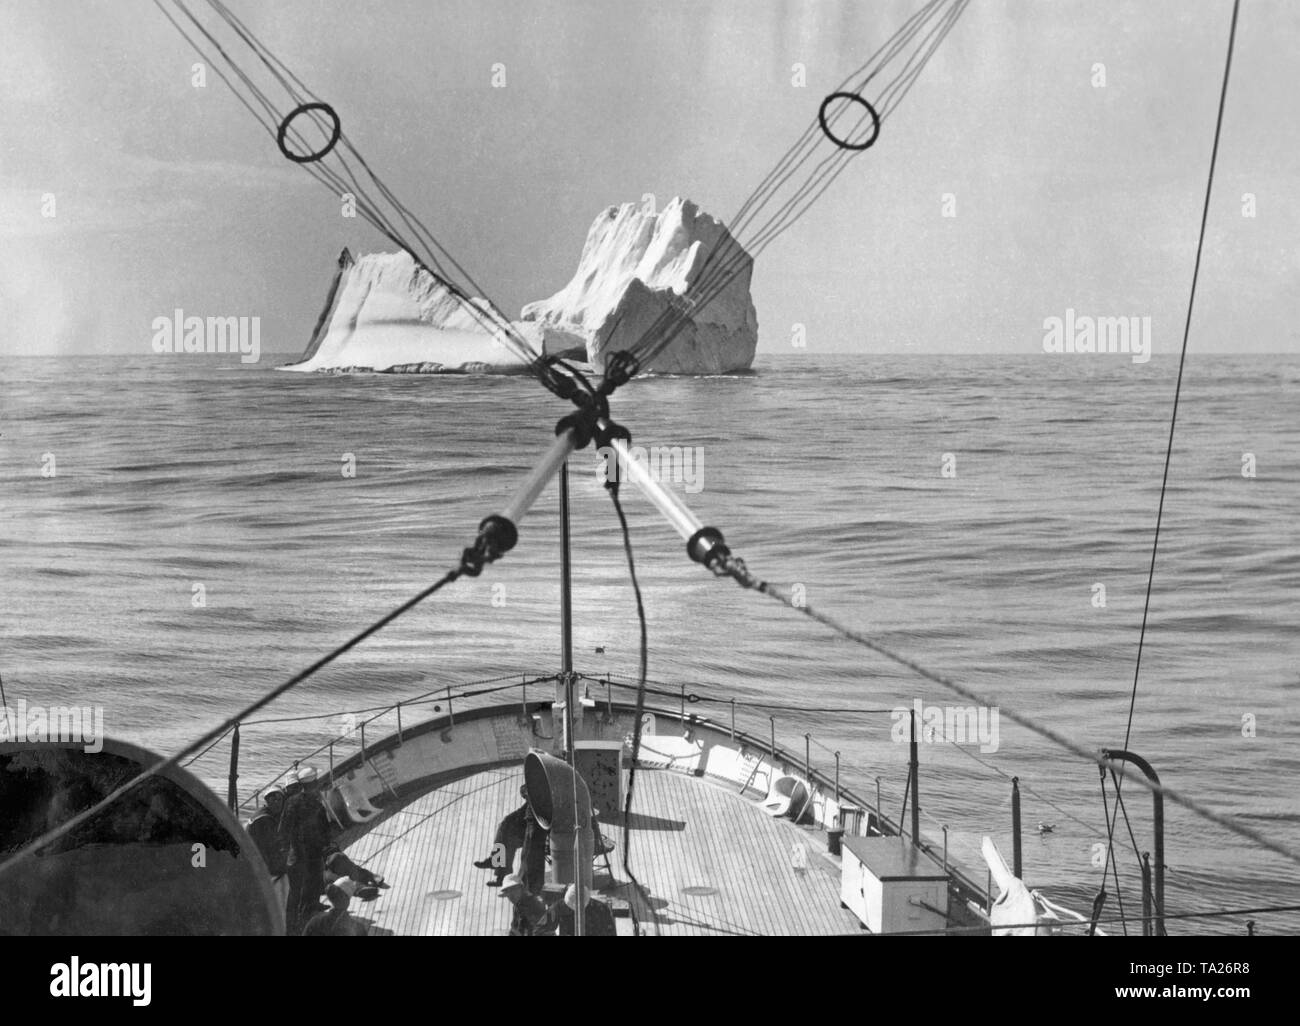 A ship of the International Ice Patrol is heading for an iceberg. In the 1920s, large icebergs were blown up to minimize the risks of transatlantic shipping. Stock Photo